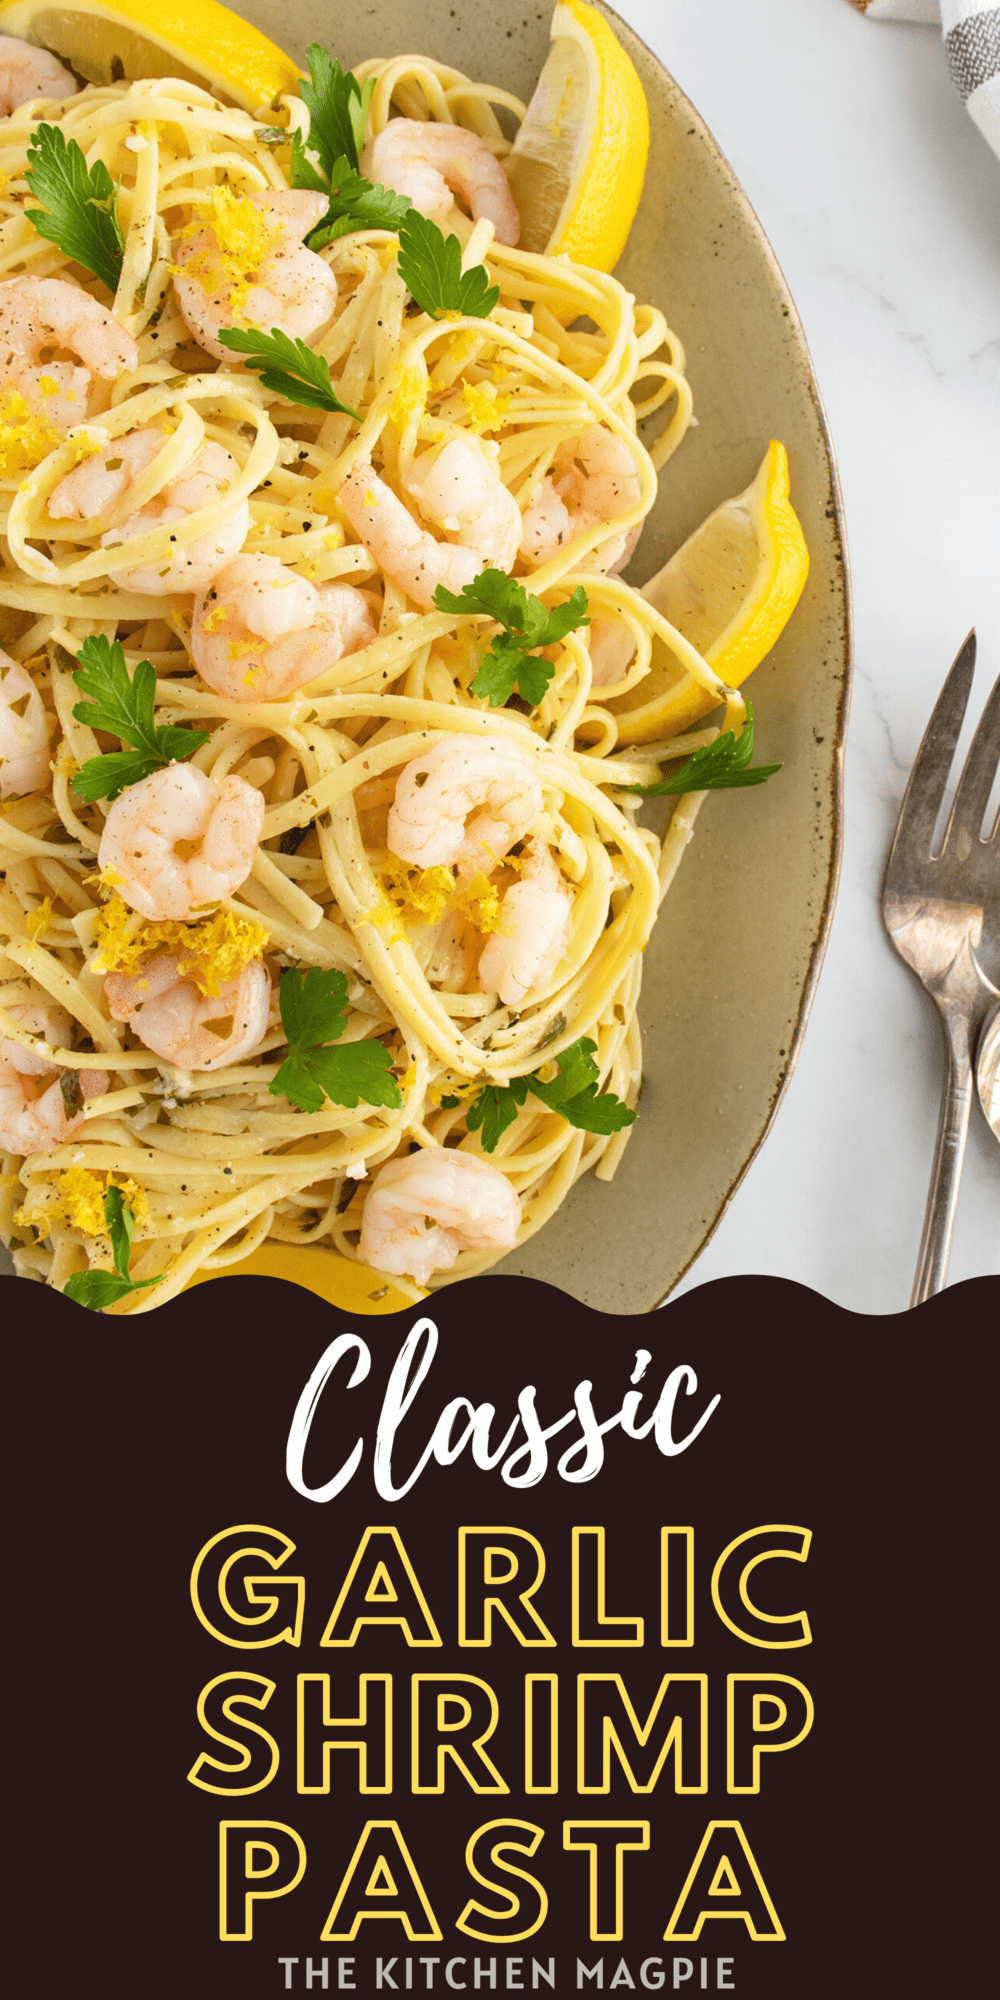 Delicious, homemade garlic butter shrimp over your favorite pasta. Serve it up using our homemade garlic butter sauce and dig right in!